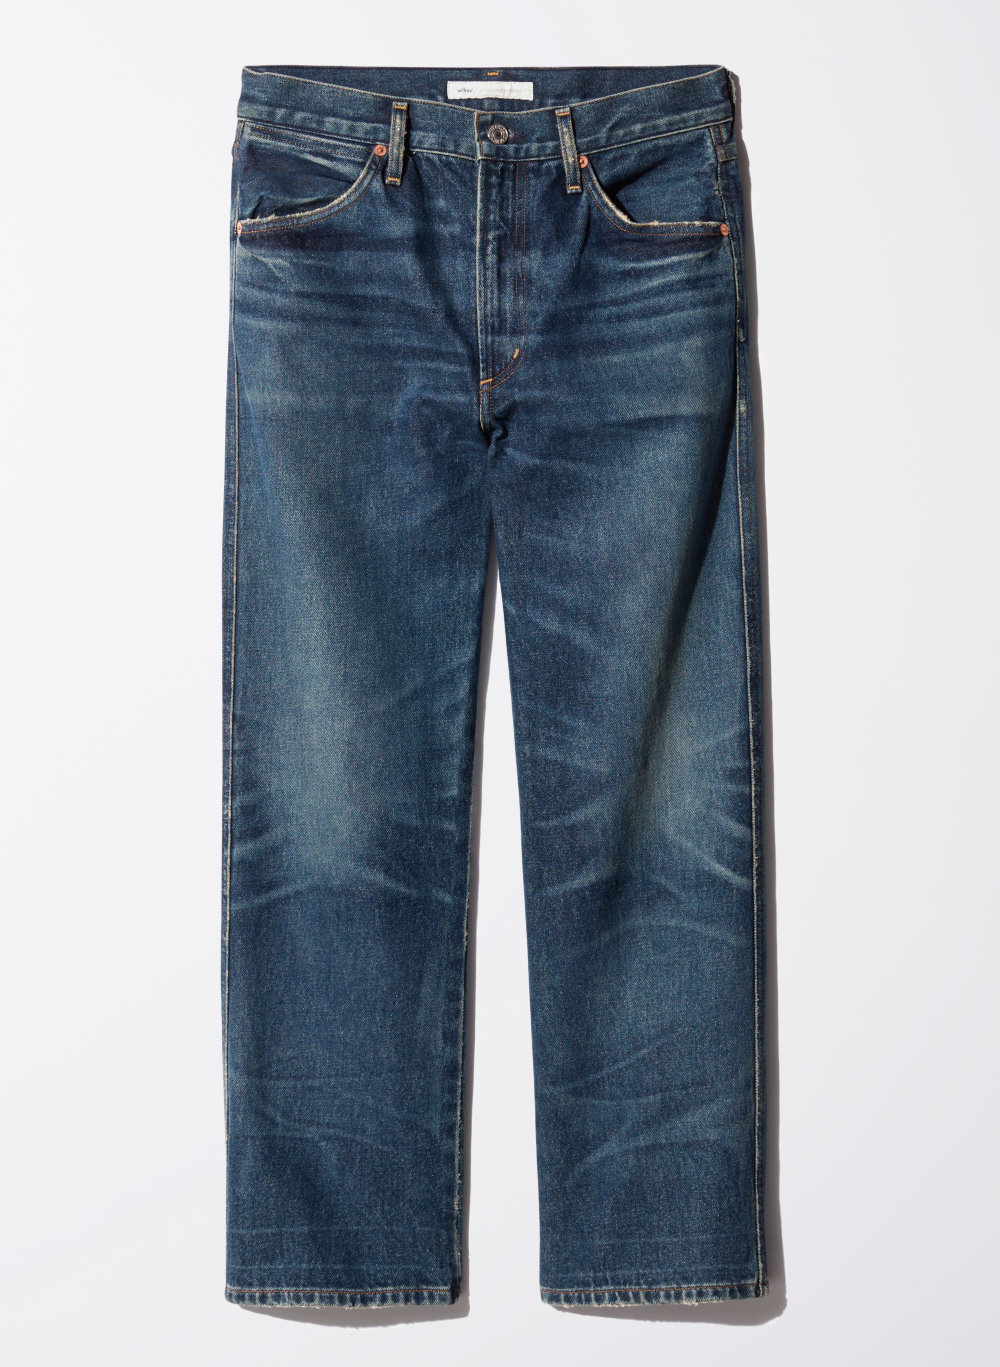 Wilfred/Citizens of Humanity LIV VINTAGE BLUE | Aritzia